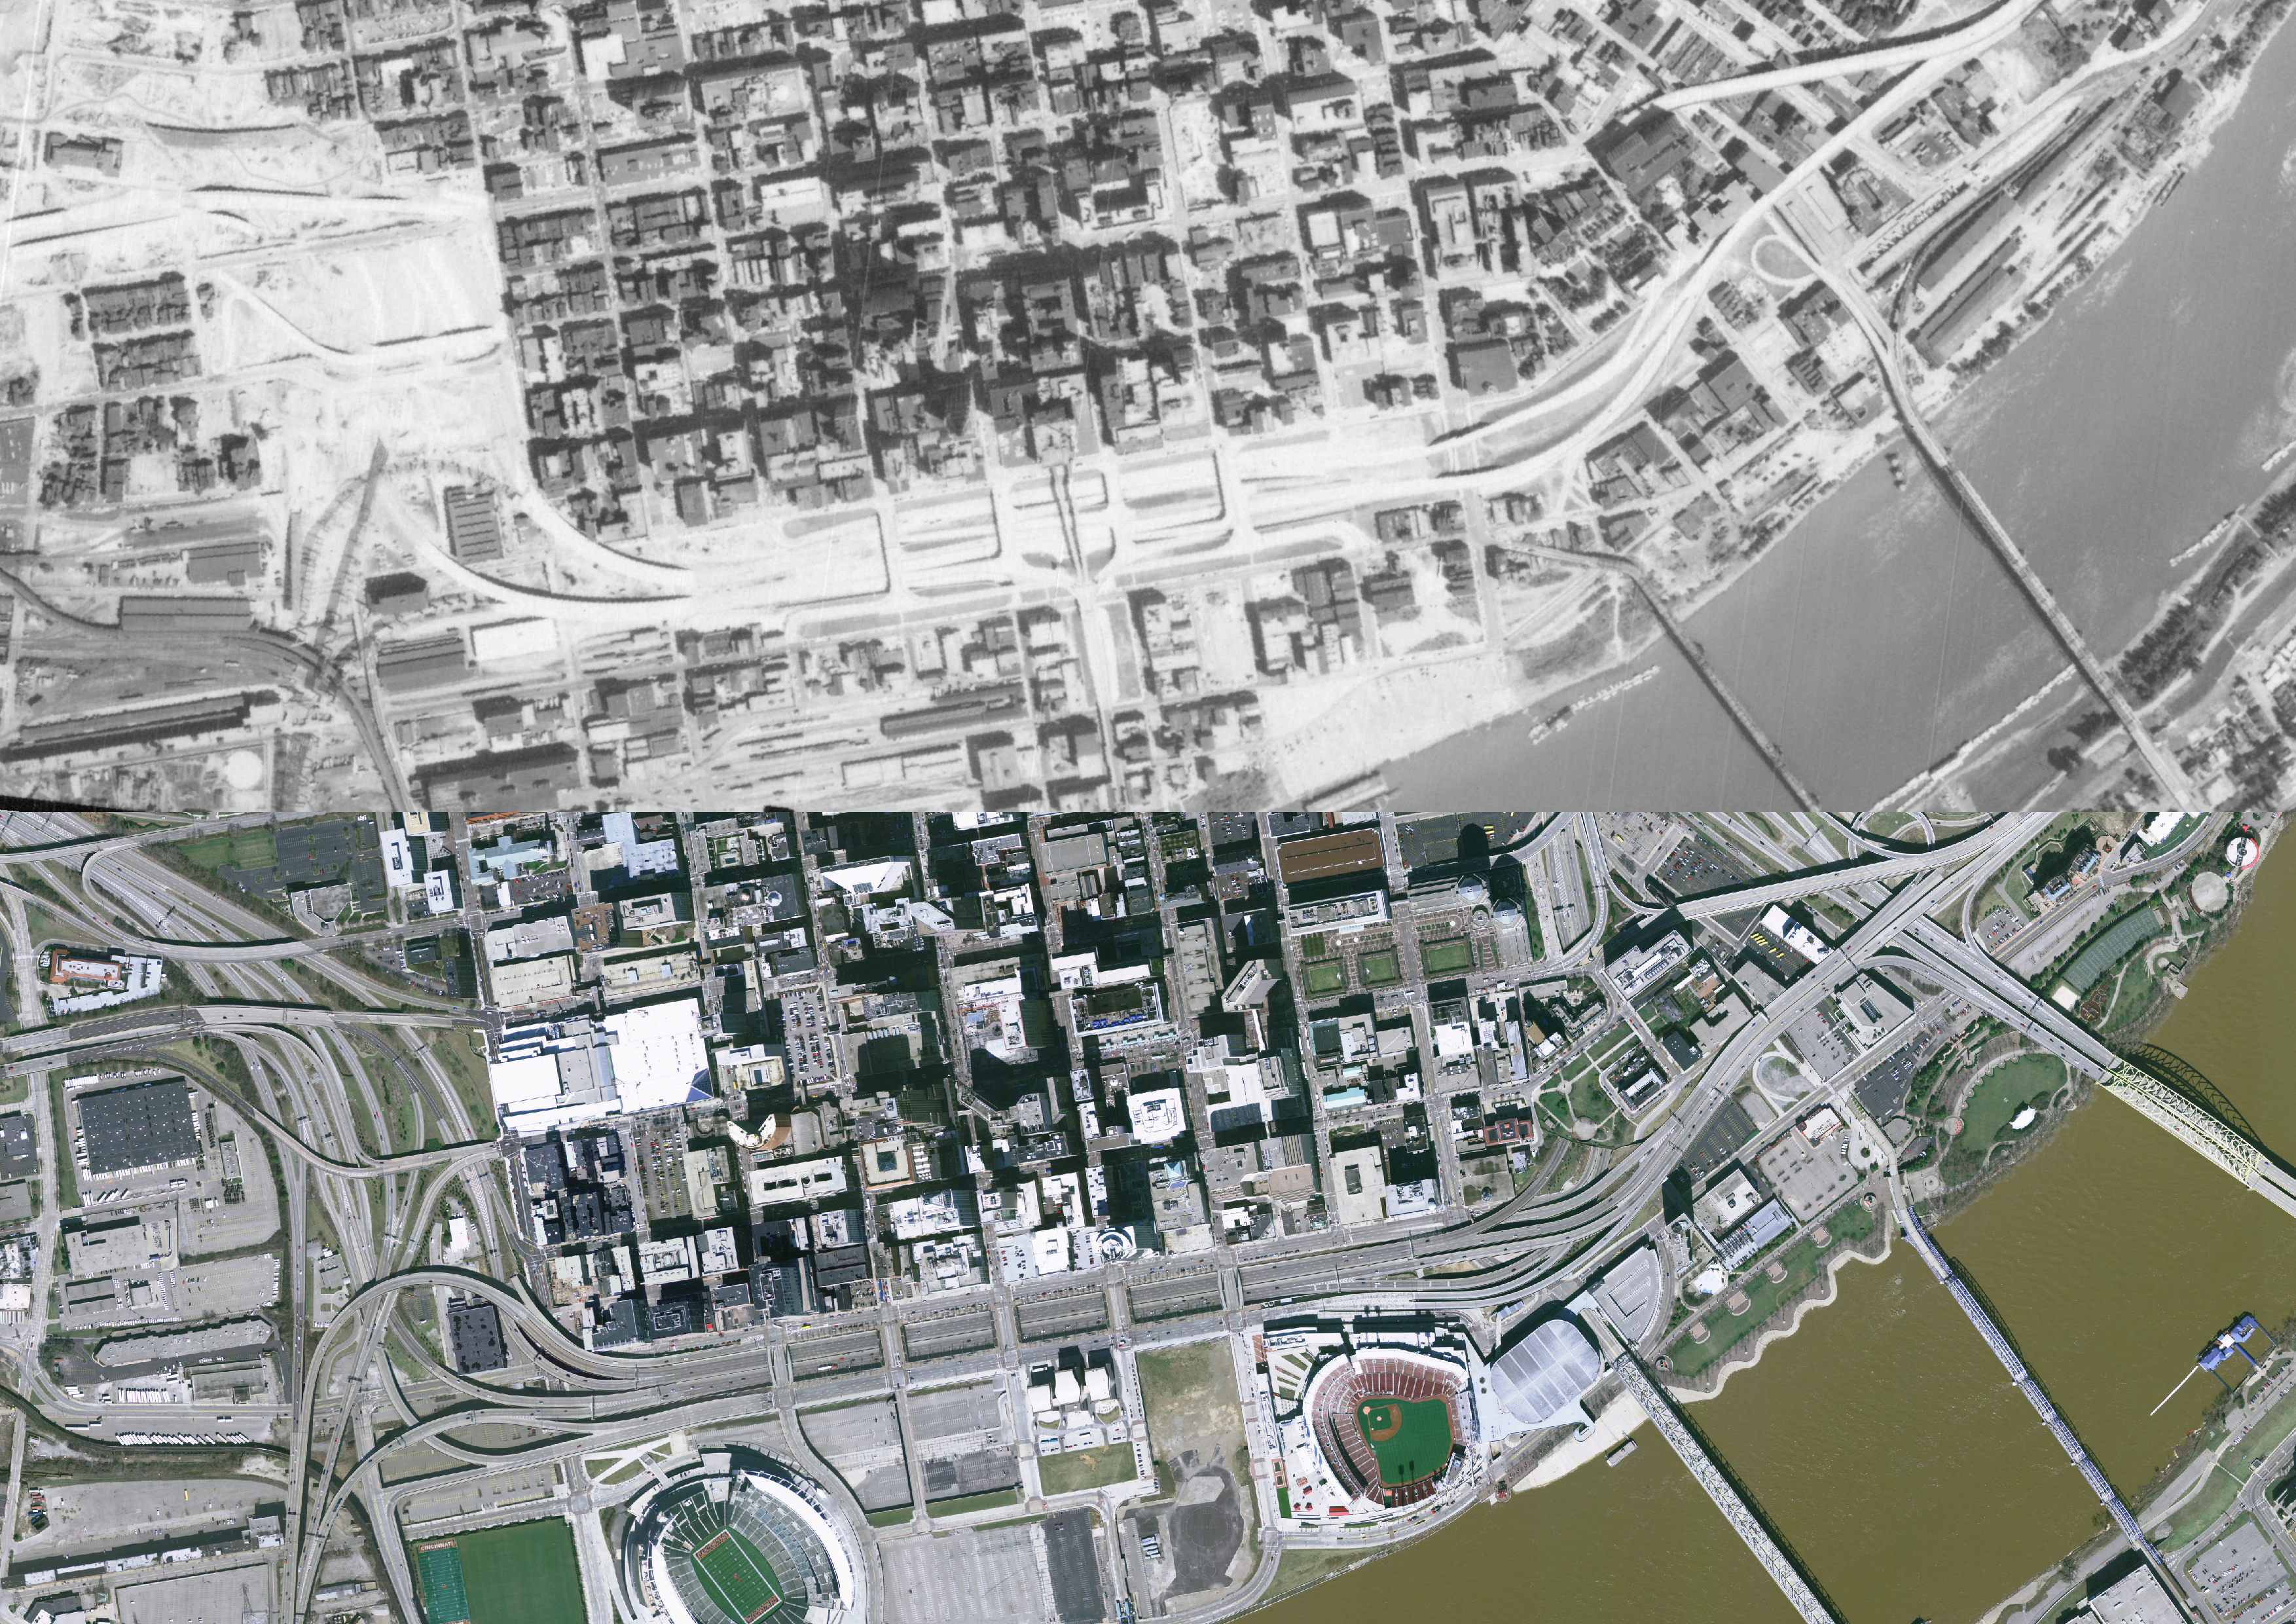 side by side aerial imagery of downtown Cincinnati and the riverfront from 1962 and from 2007